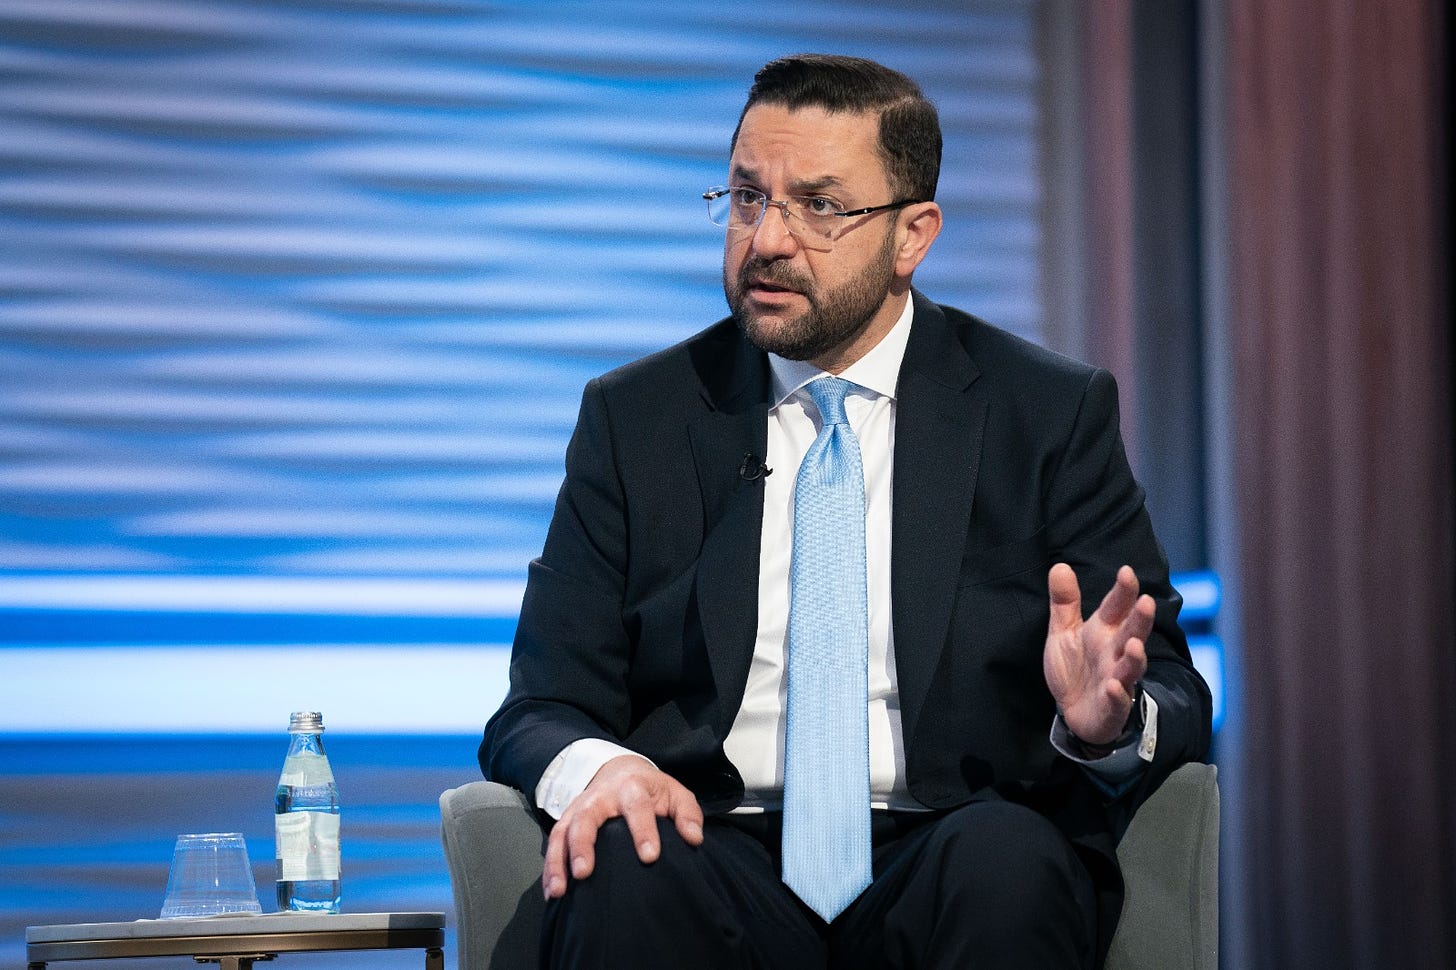 A conversation with the Finance Minister of Jordan H.E. Mohamad Al-Ississ -  Atlantic Council